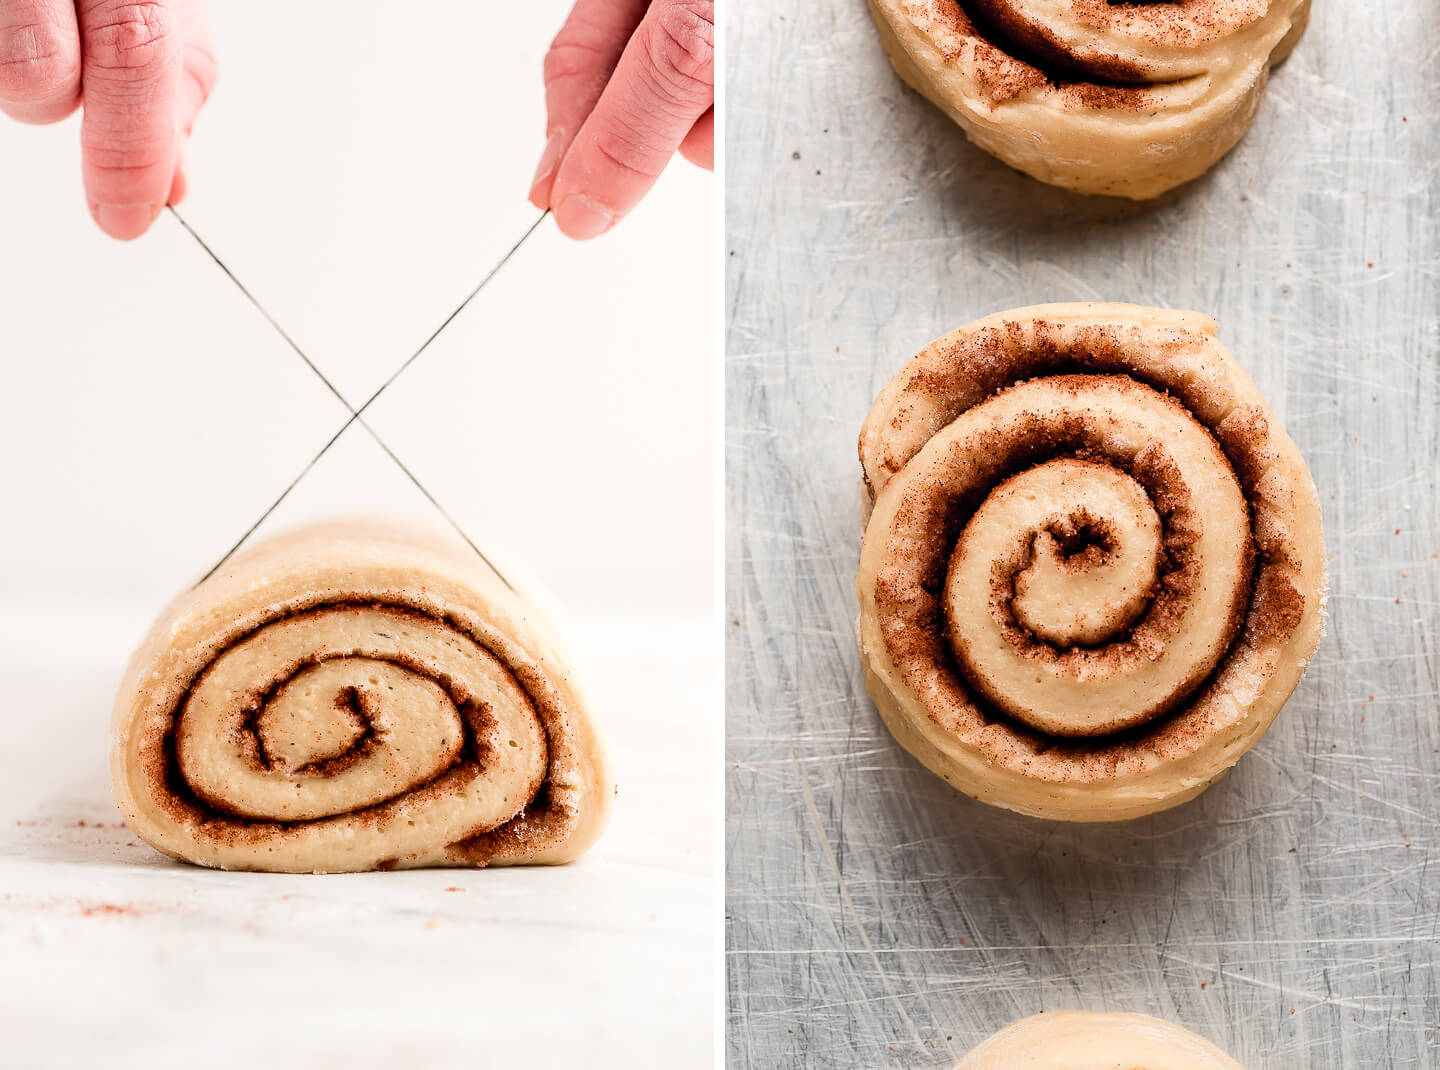 Diptych- Using string to slice the log of cinnamon roll dough; close up shot of uncooked cinnamon roll.